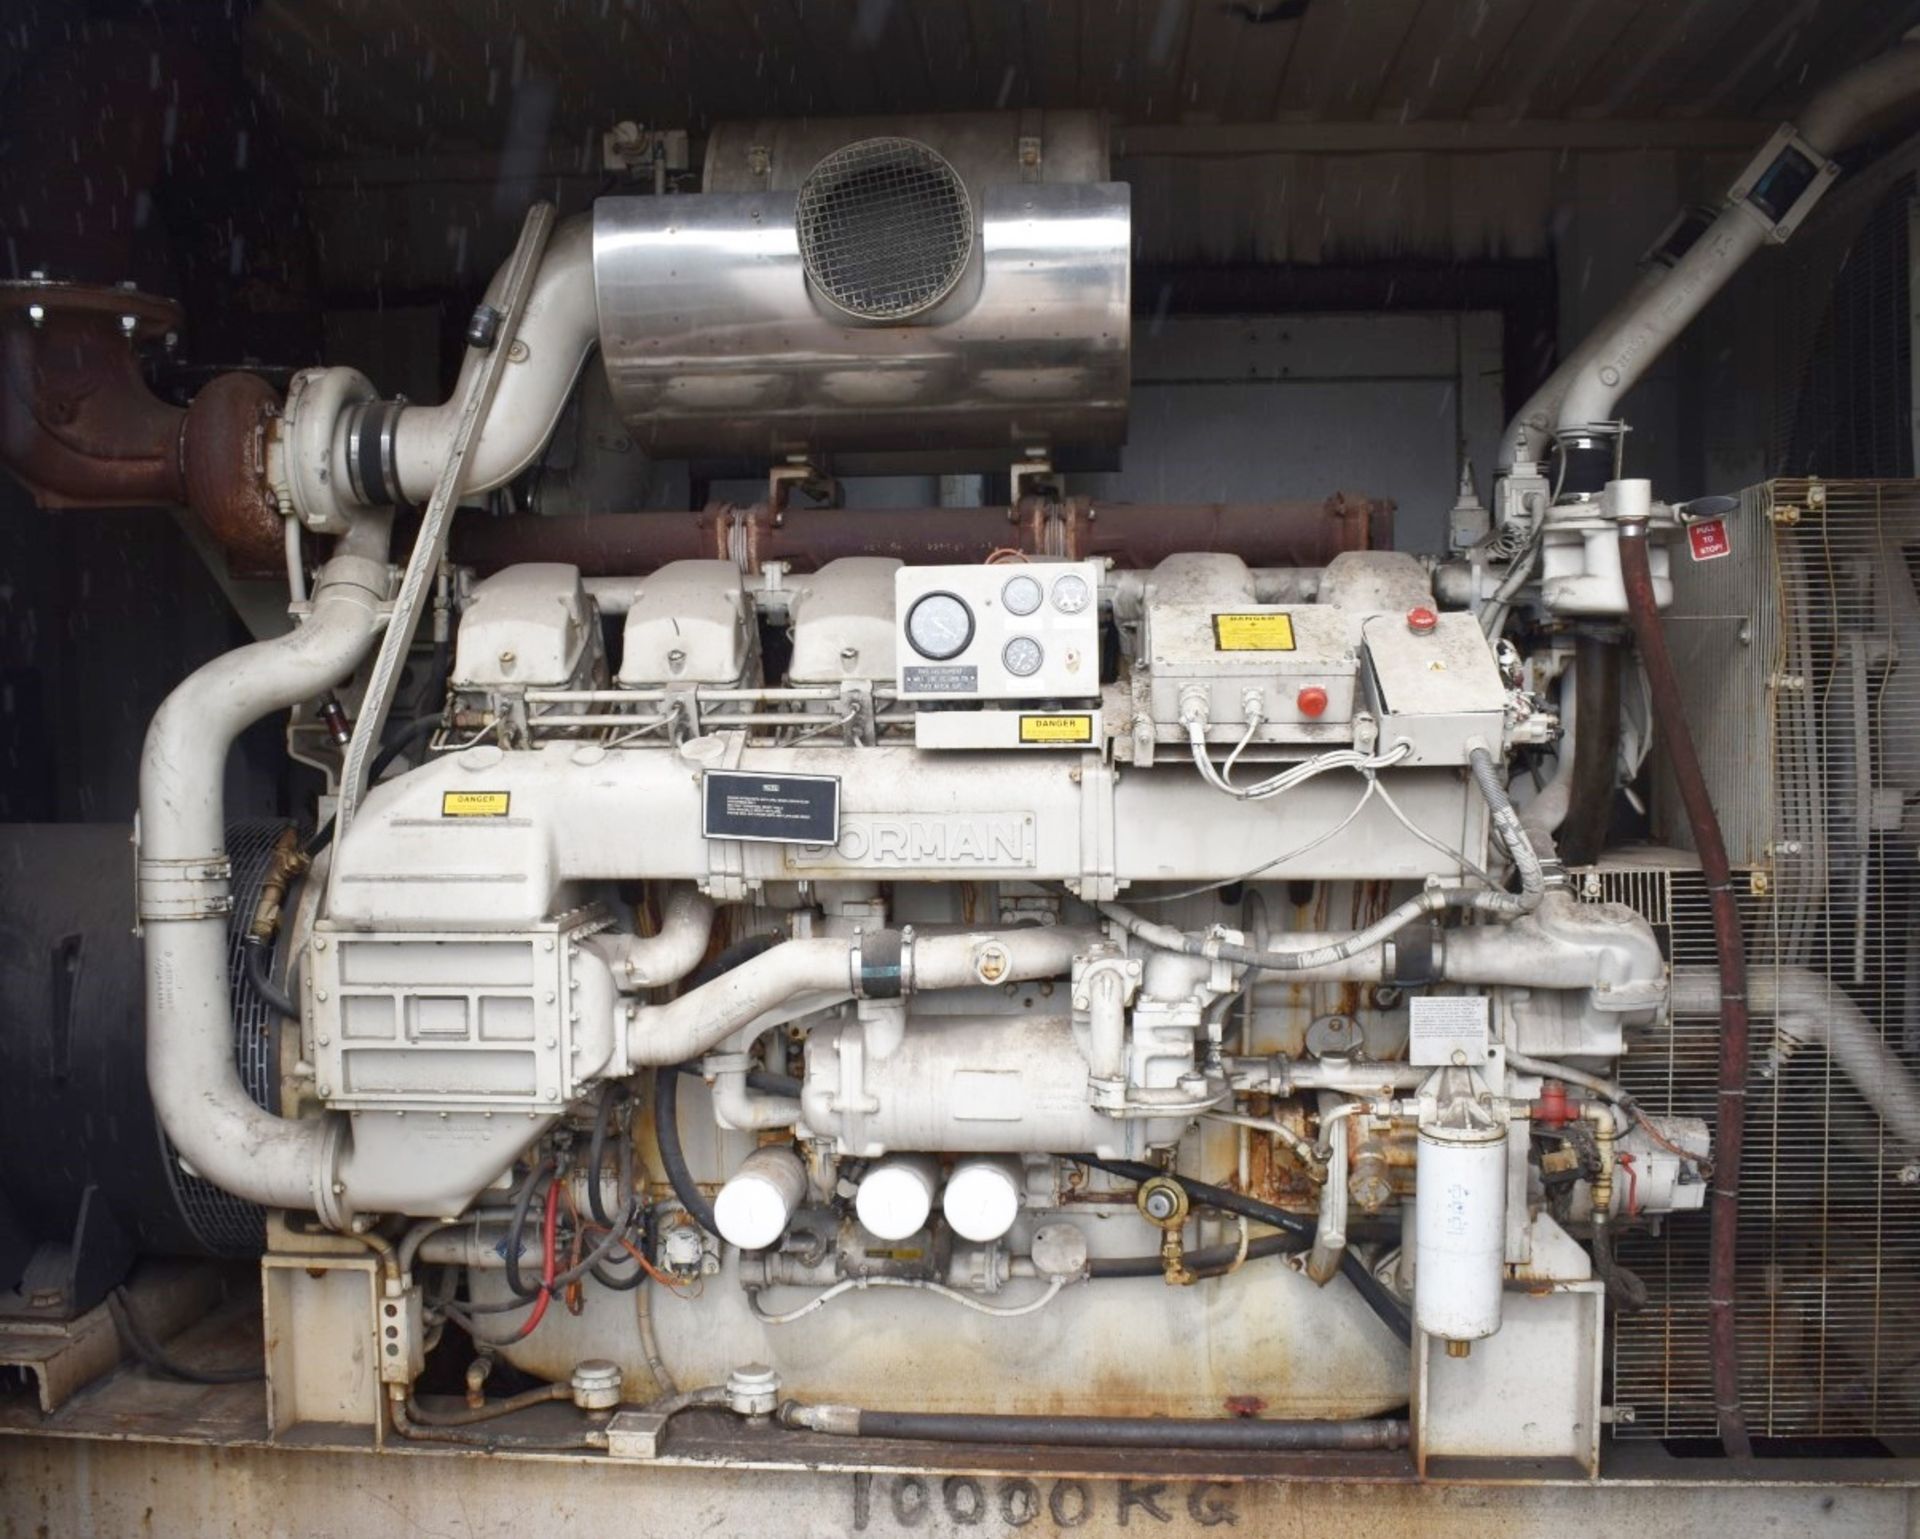 1 x Puma 1000kw Generator With Doorman Engine - Housed in 20ft Shipping Container - CL547 - No VAT - Image 7 of 28